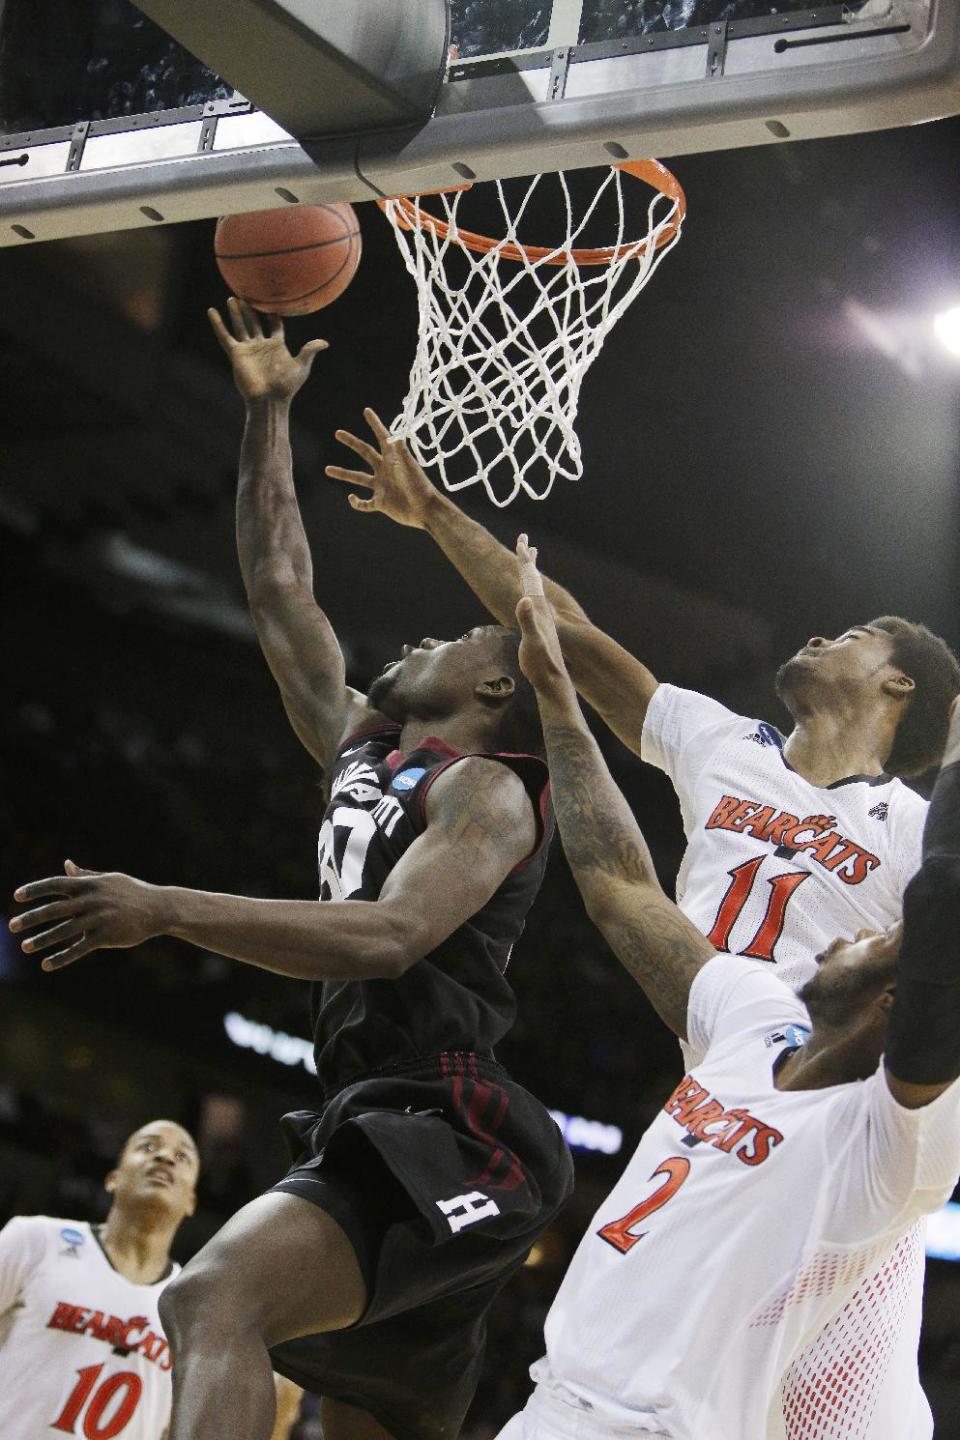 Harvard’s Kyle Casey (30) attempts a layup against Cincinnati’s Jermaine Lawrence (11) and Titus Rubles (2) in the first half during the second-round game of the NCAA college basketball tournament in Spokane, Wash., Thursday, March 20, 2014. (AP Photo/Young Kwak)